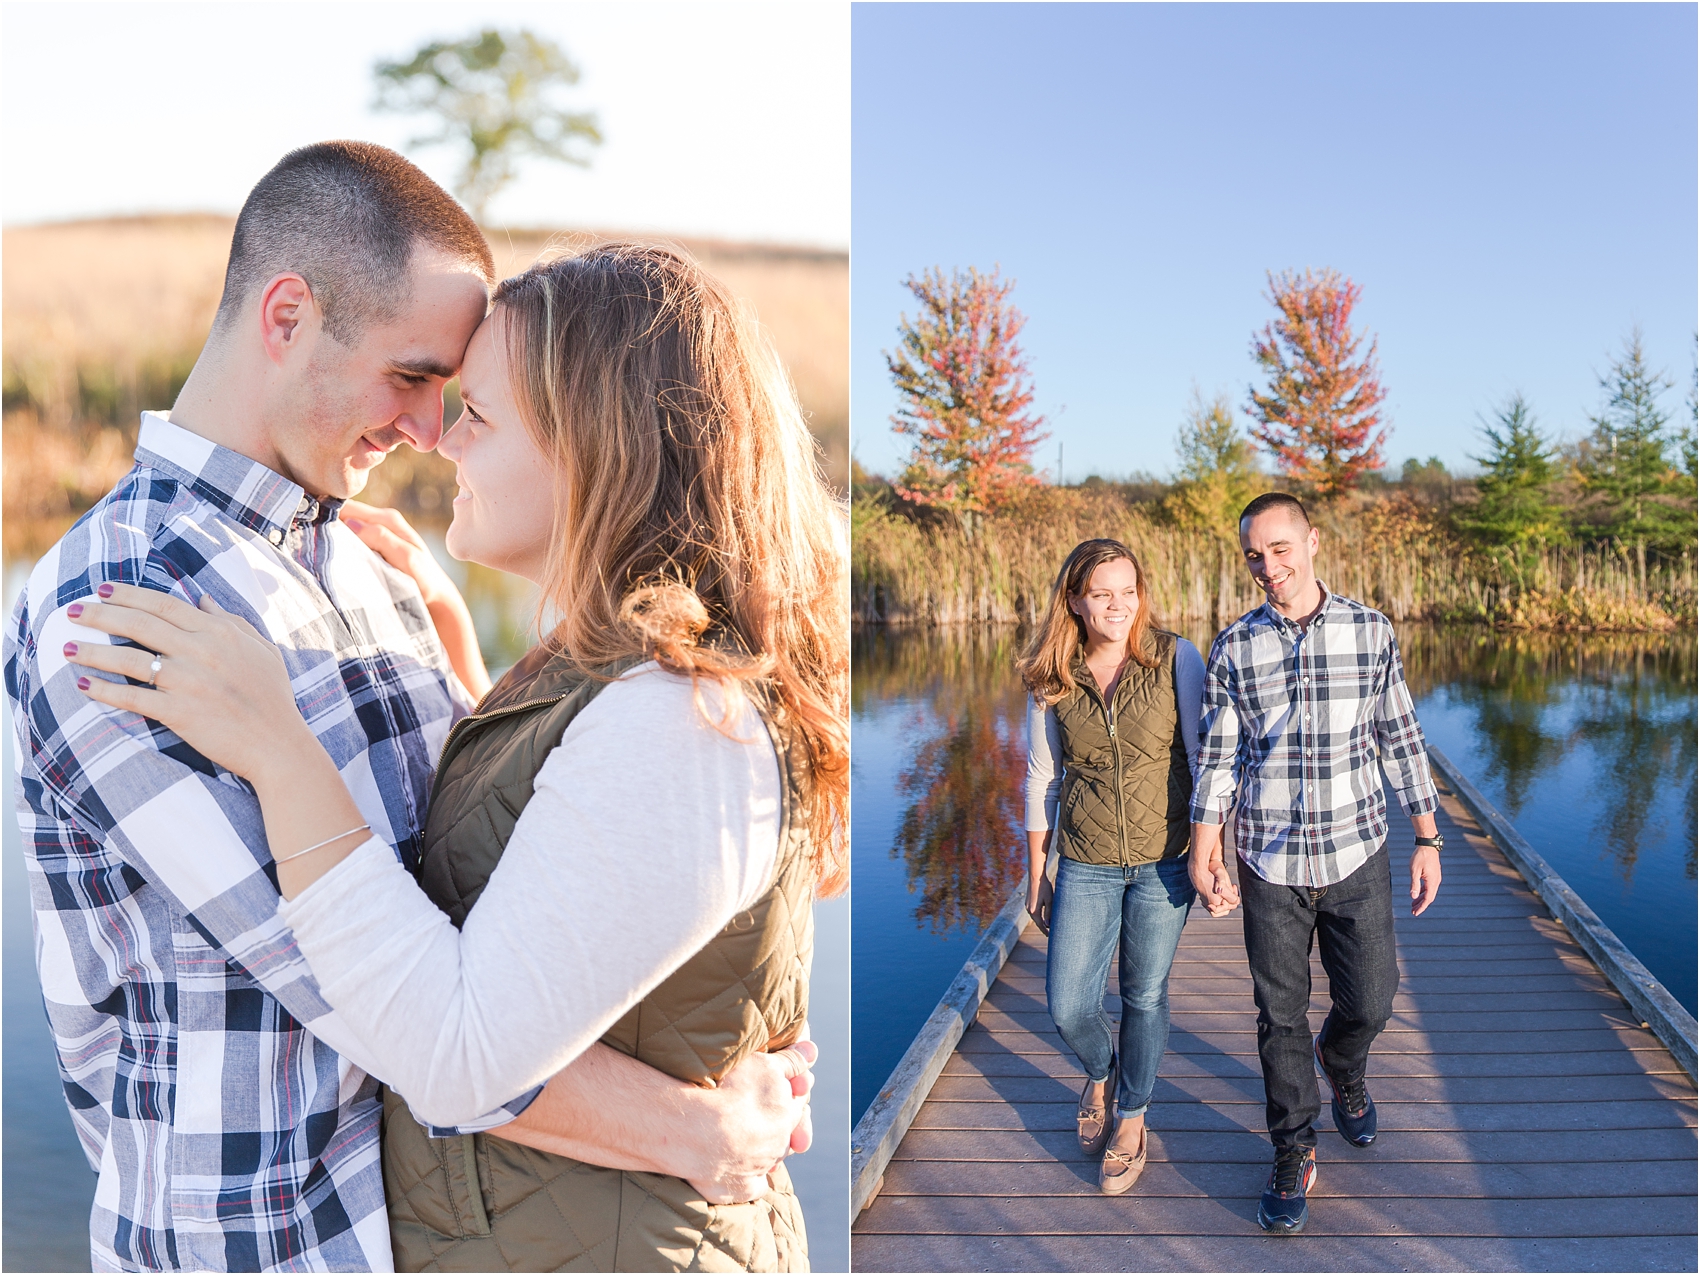 romantic-fall-engagement-photos-at-indian-springs-metropark-in-clarkston-mi-by-courtney-carolyn-photography_0007.jpg